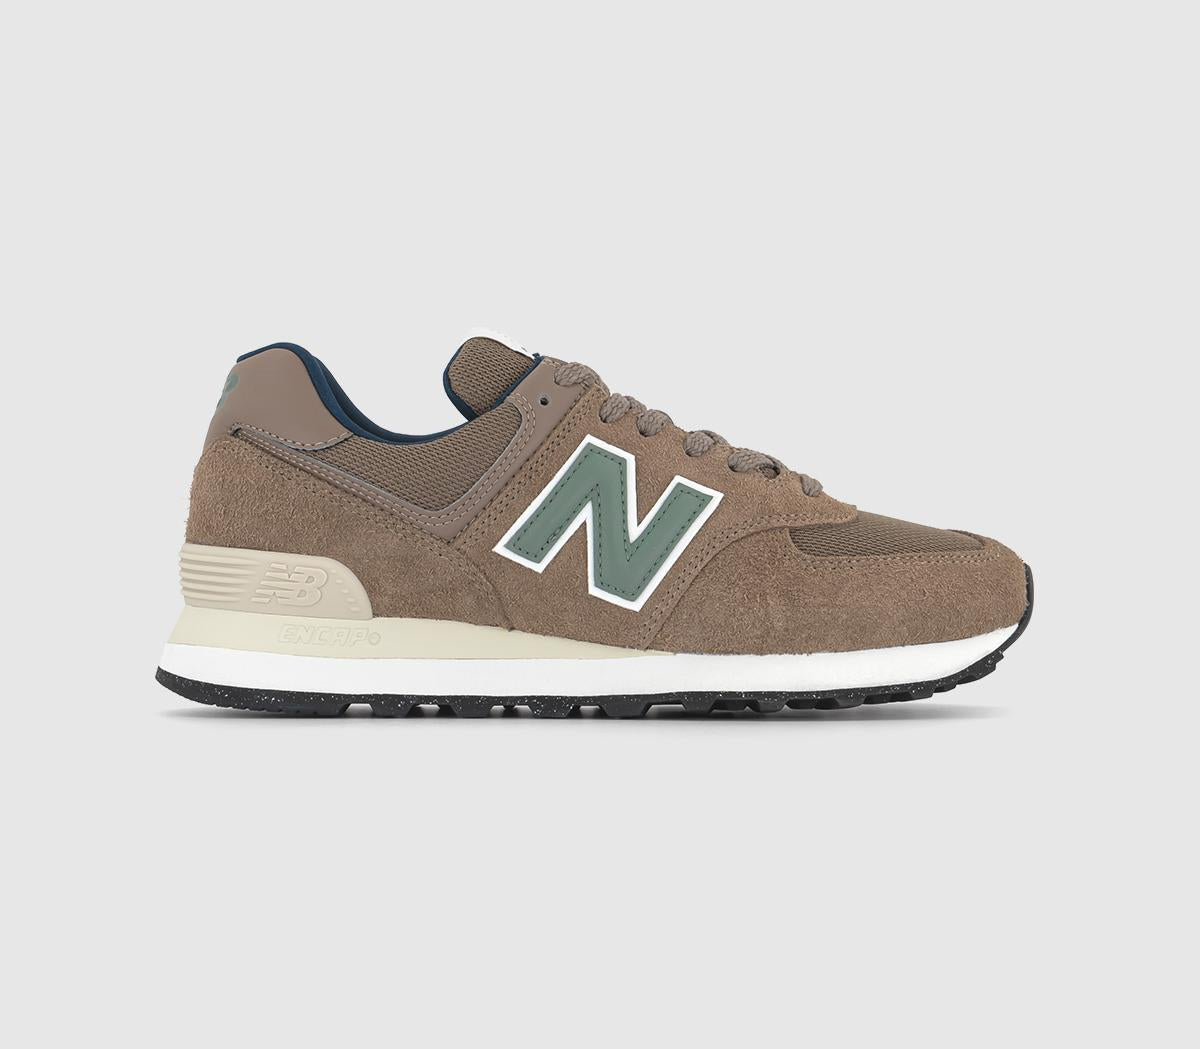 Mens New Balance 574 Brown Brown Green Trainers